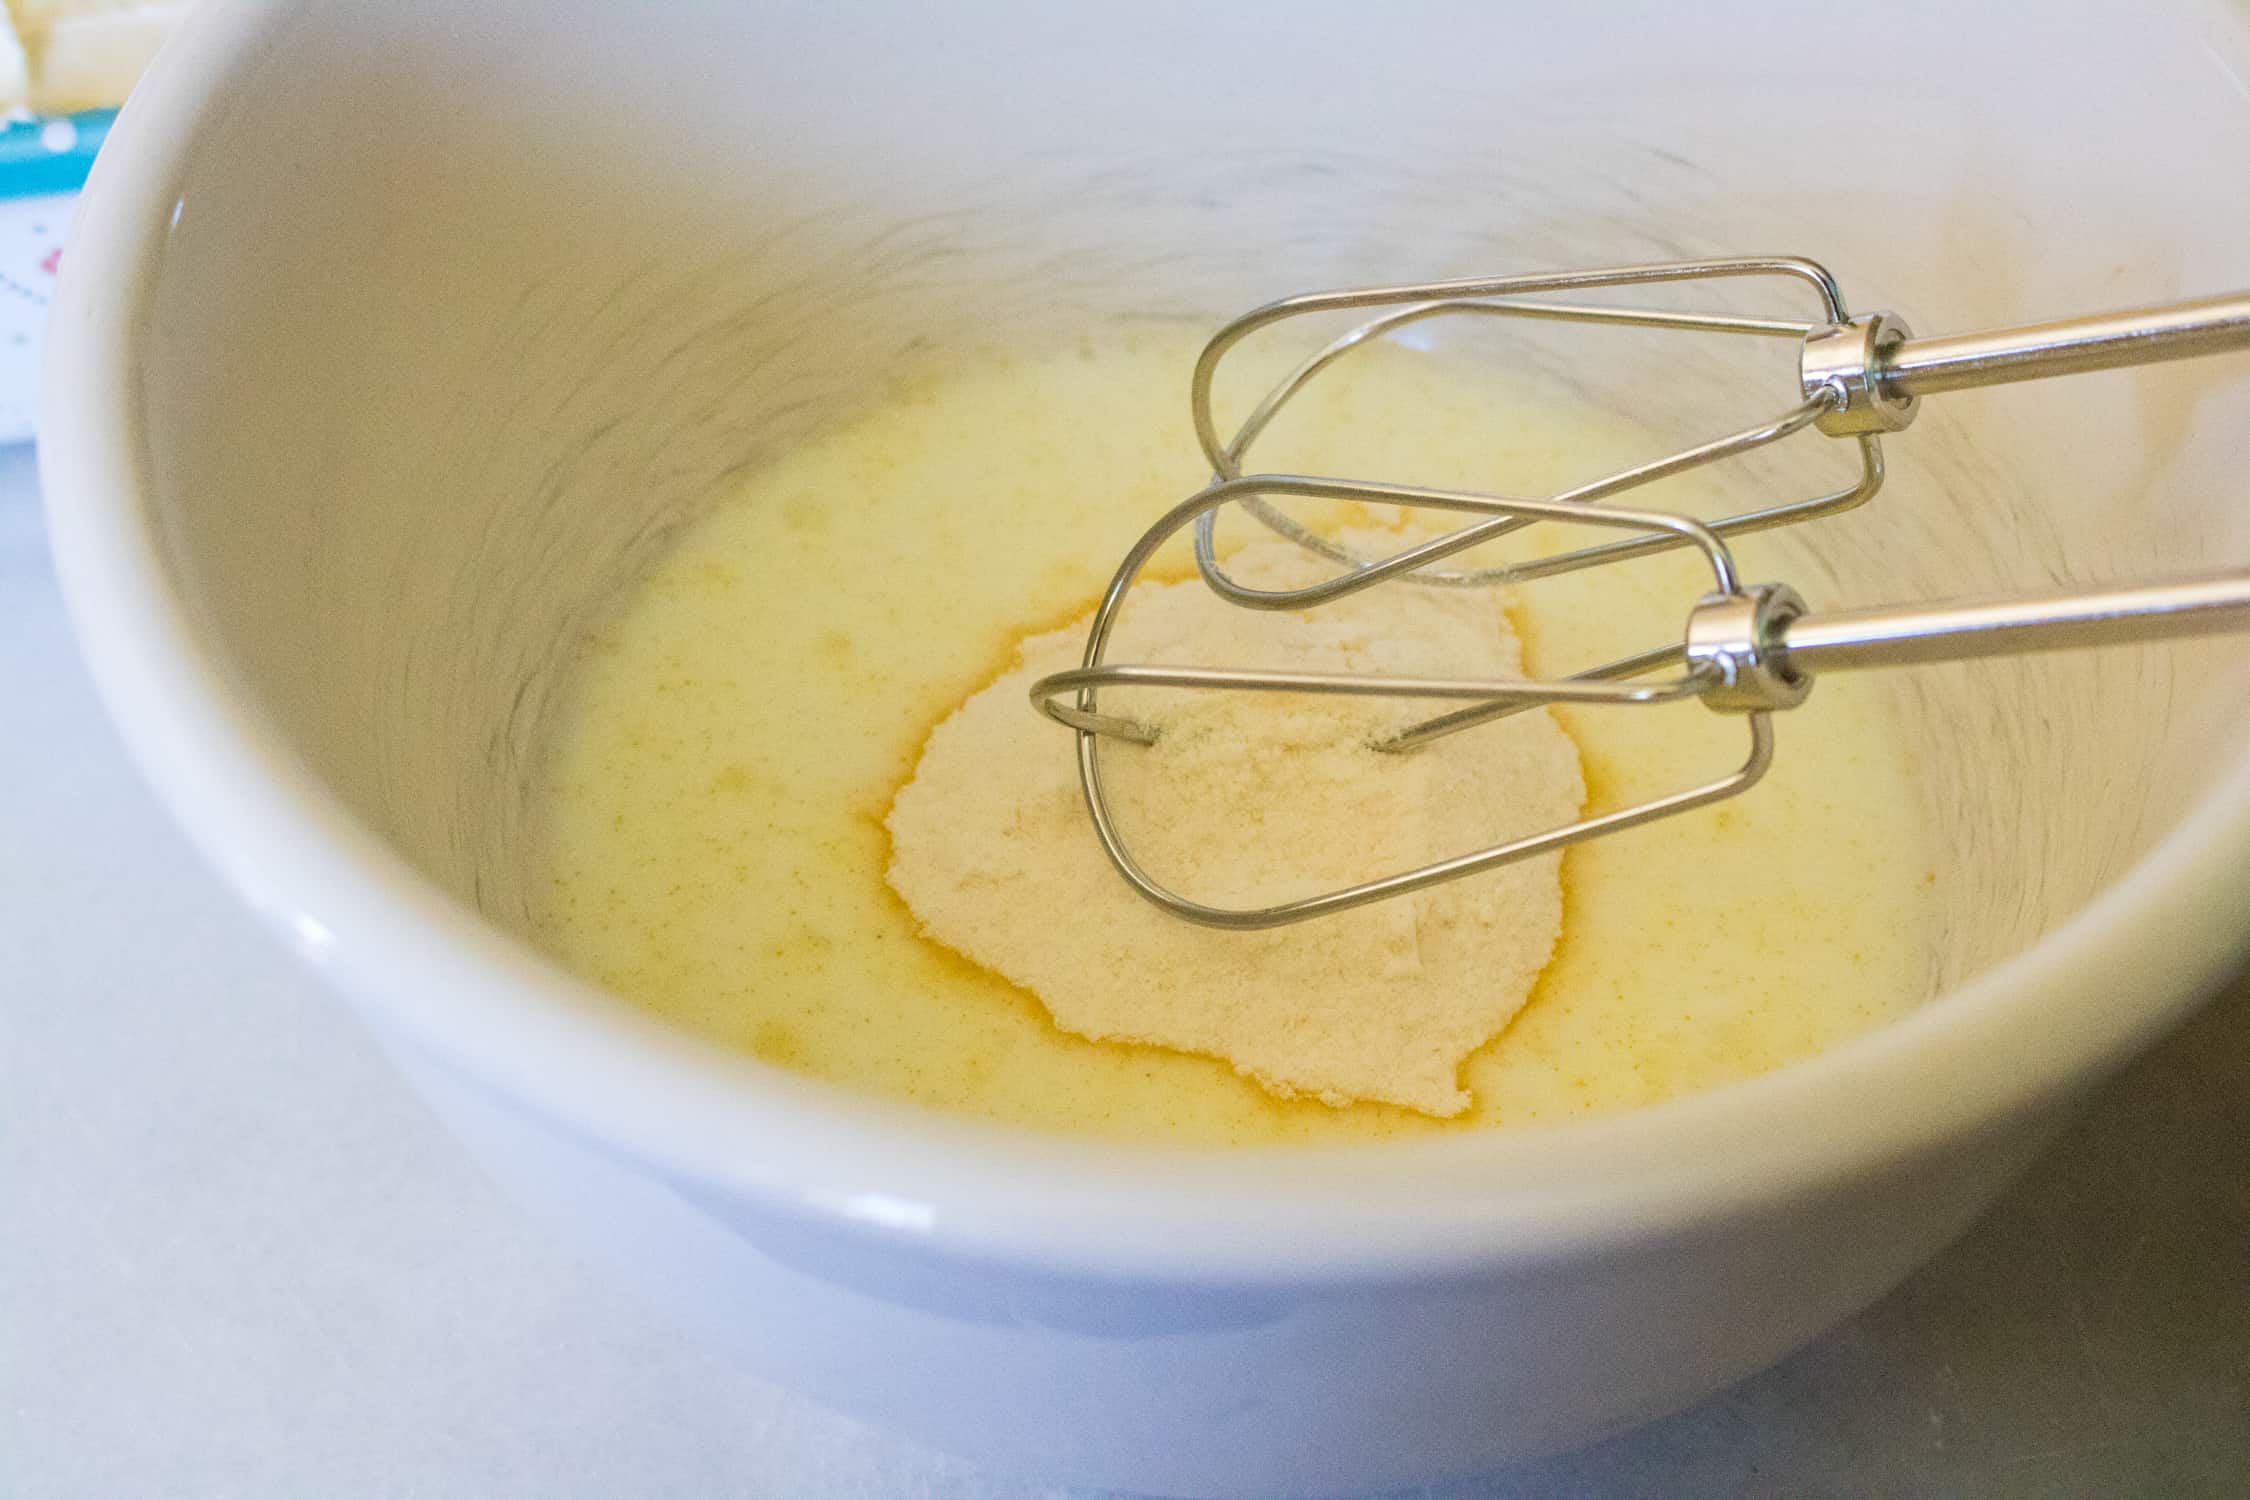 Close up view of a white bowl containing the orange cream cheese filling ingredients being mixed with an electric beater